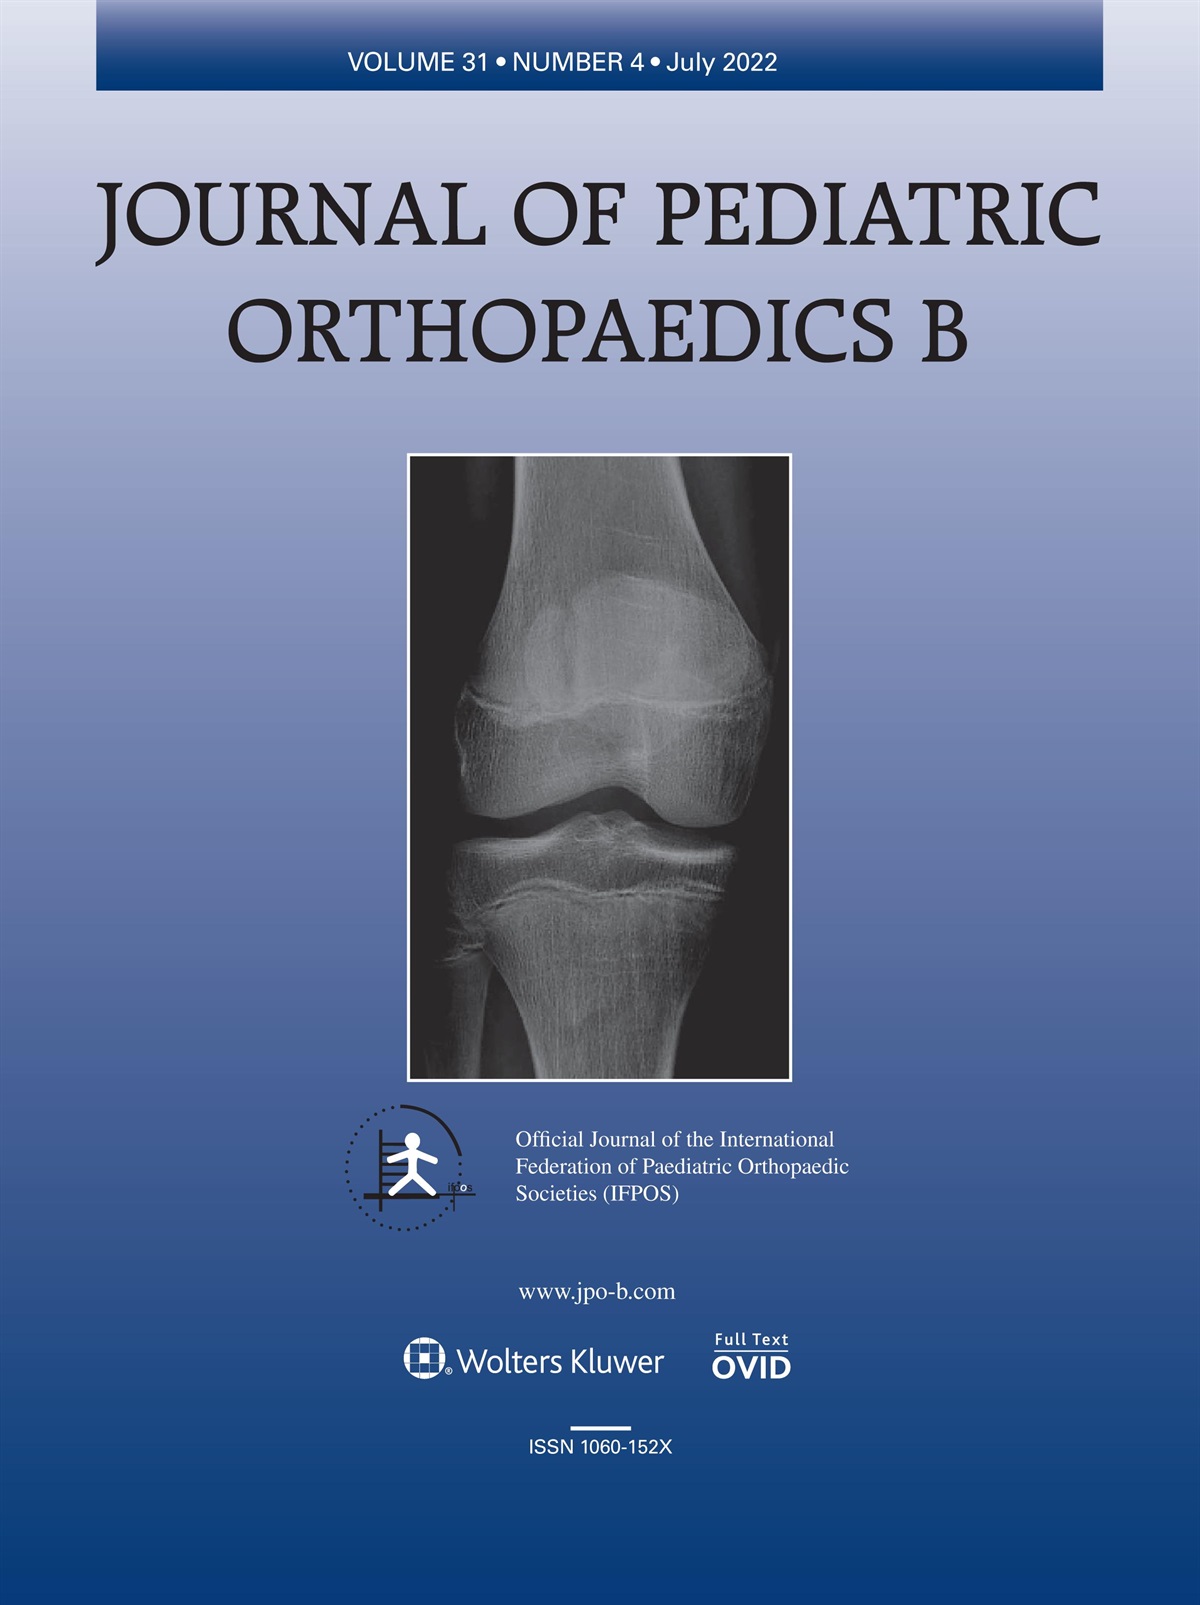 Does compliance with British Orthopaedic Association Standards for Trauma and Orthopaedics guidelines matter for displaced supracondylar fractures in children?: the experience of a tertiary referral major trauma centre over a 3.5-year period